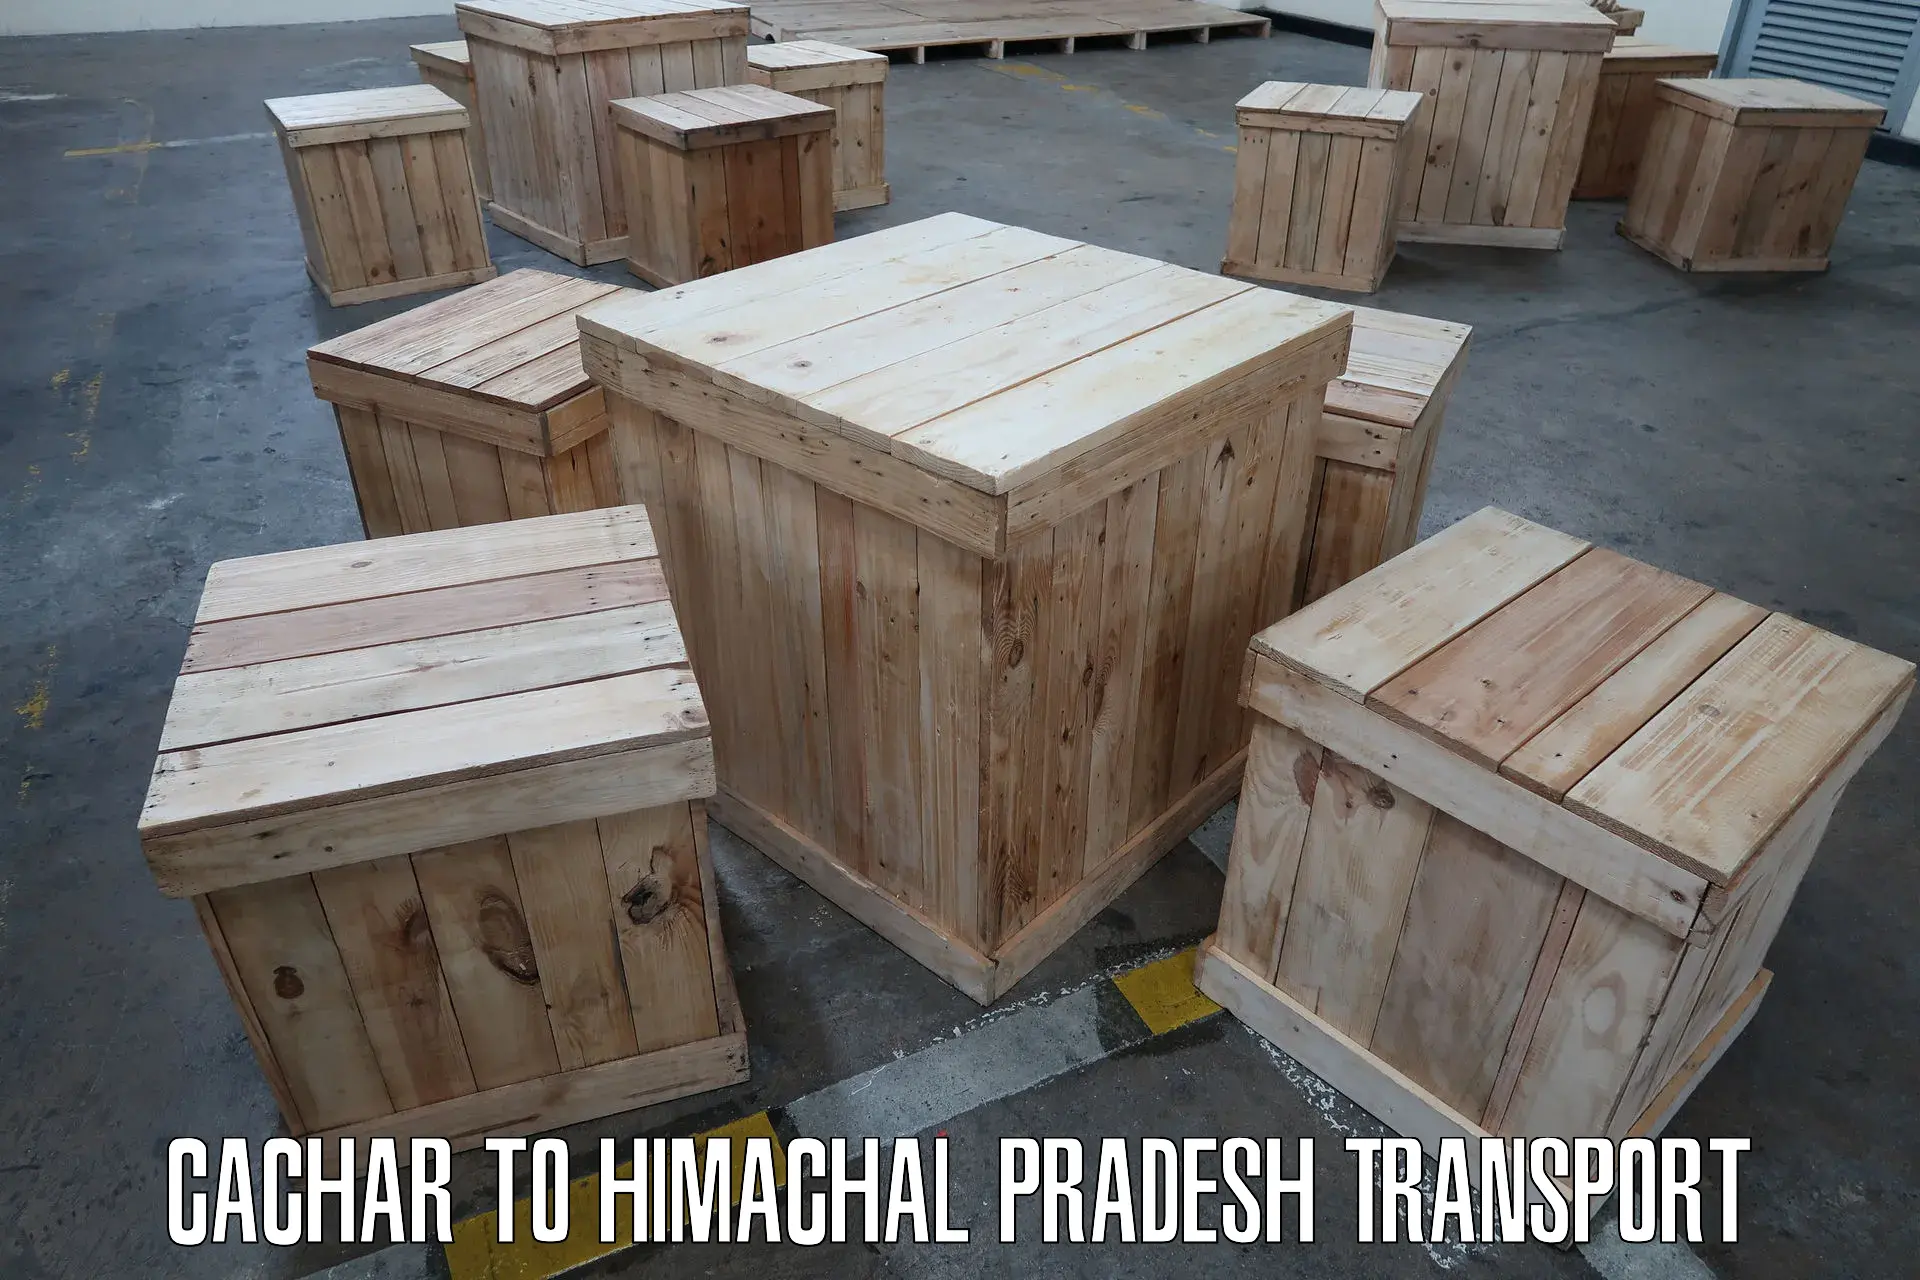 Container transportation services Cachar to Dharamshala